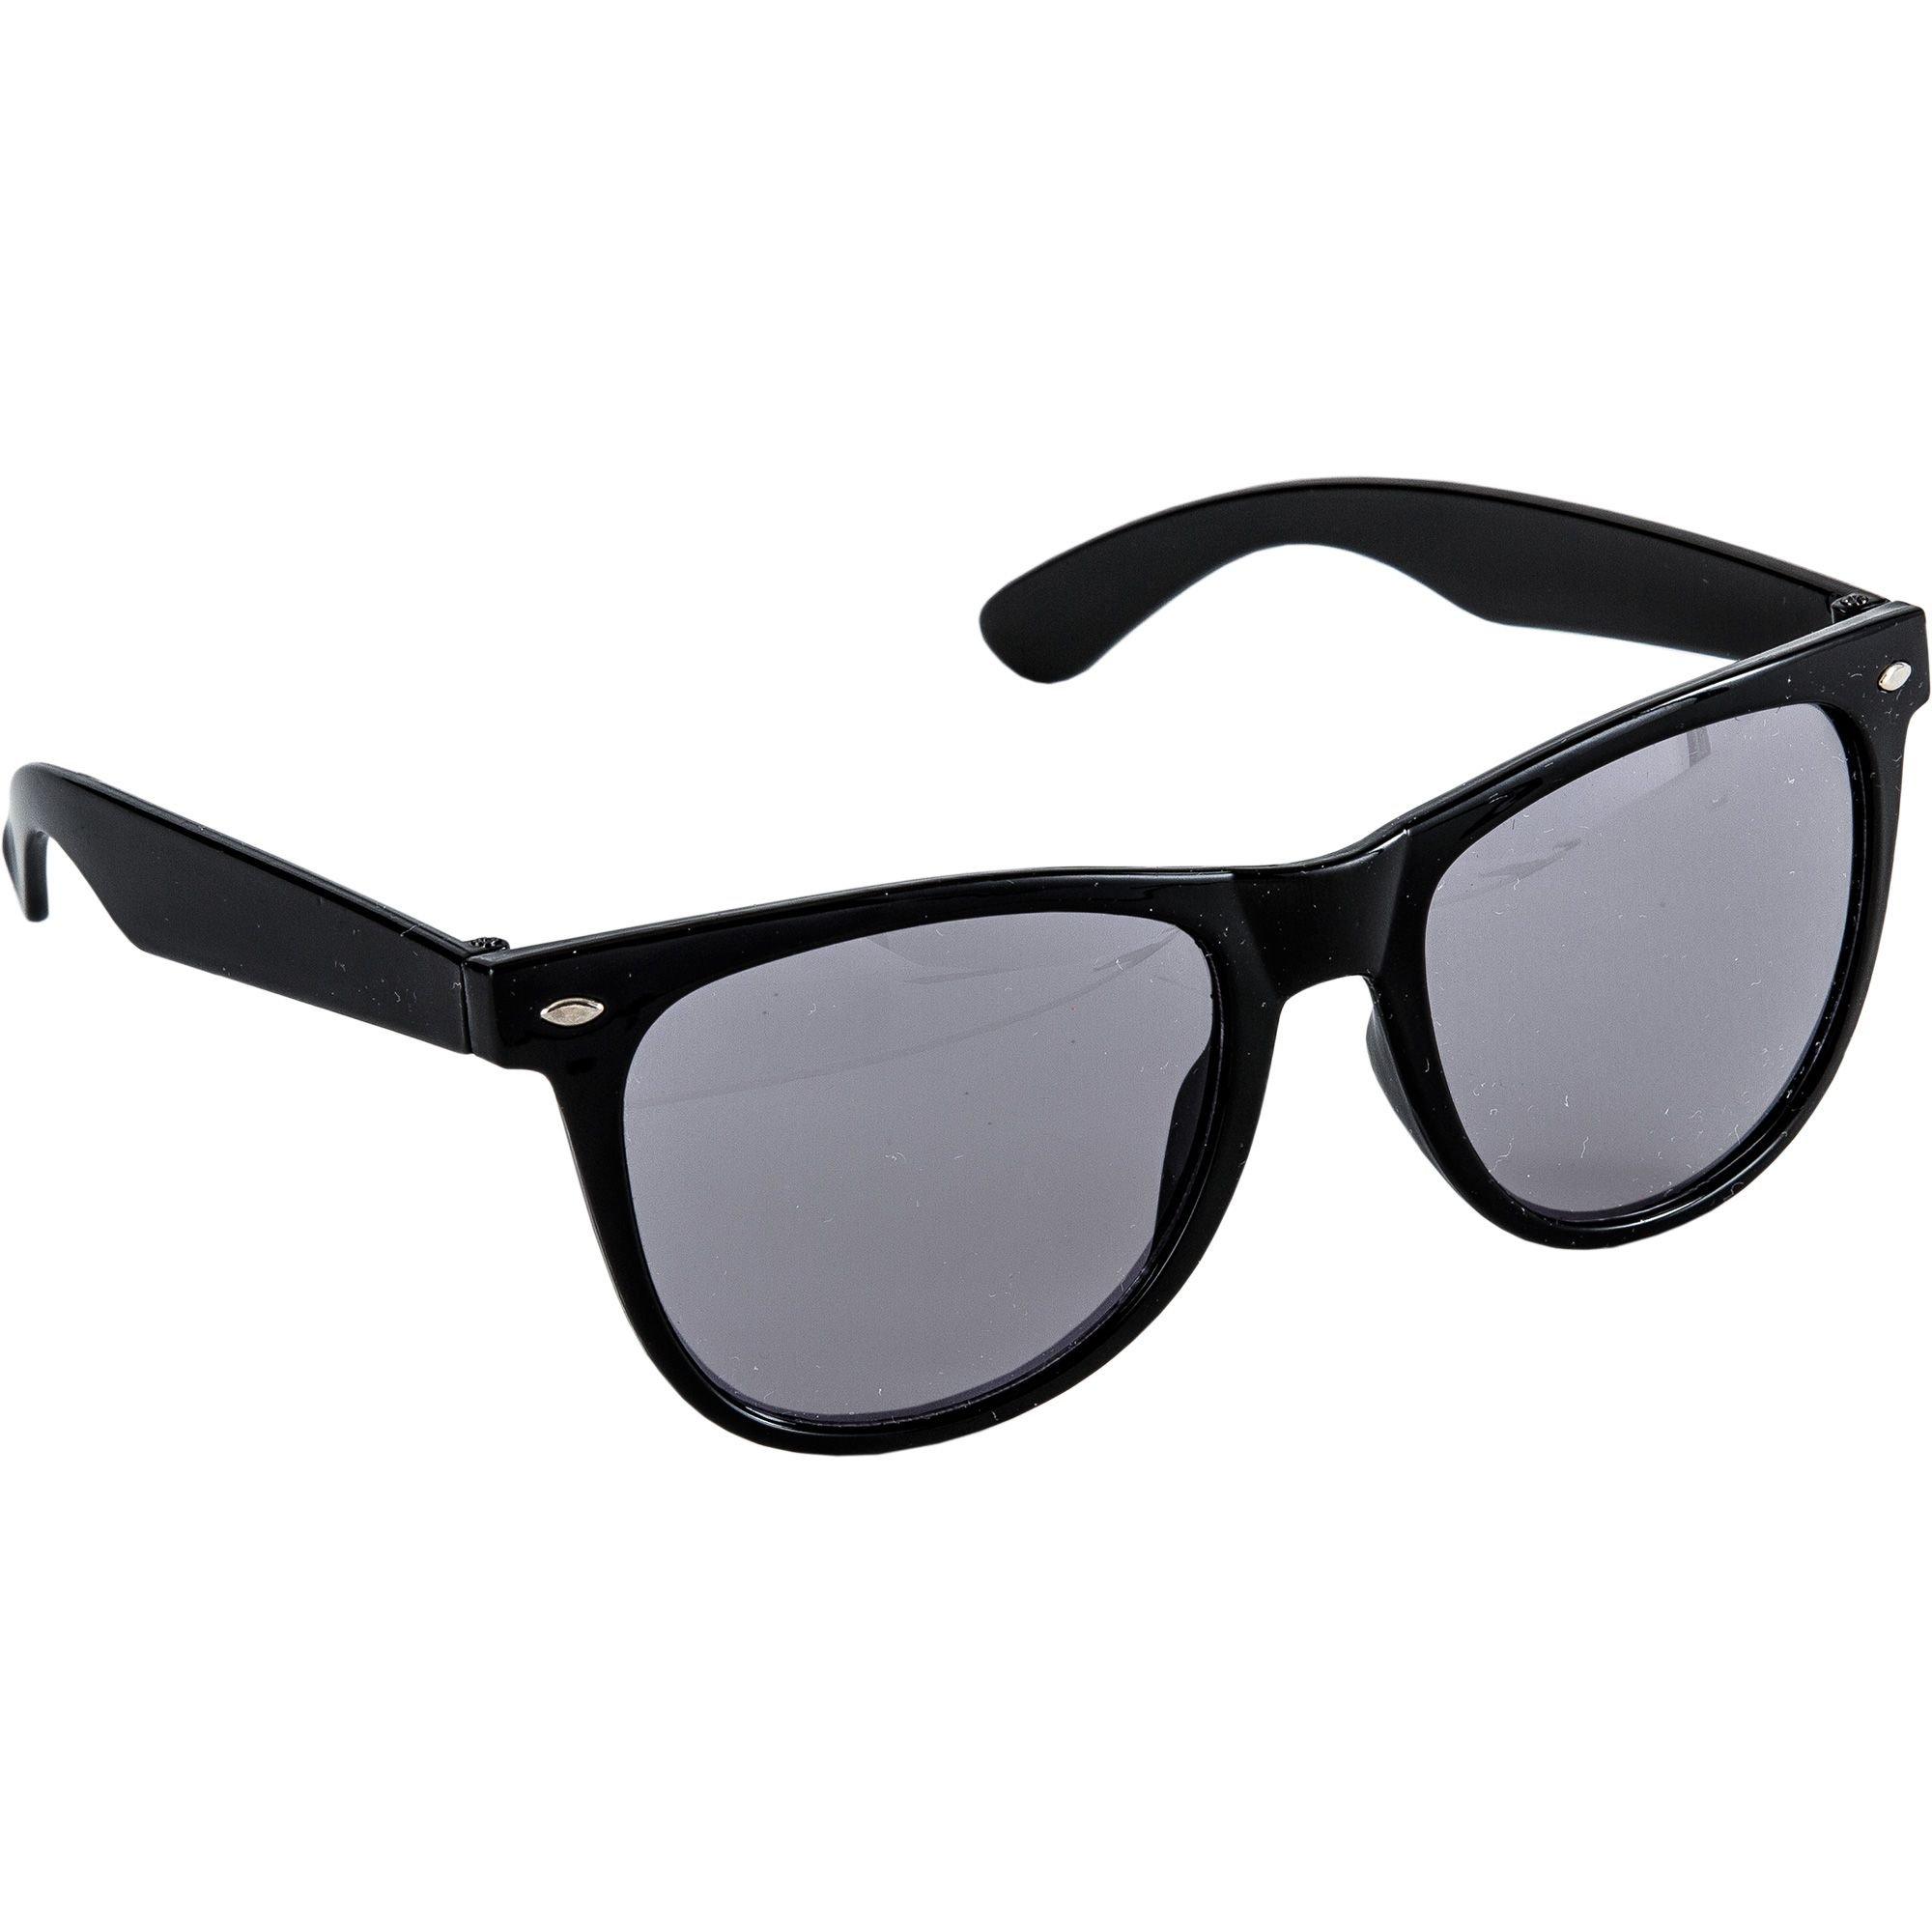 Men's spring summer autumn outfit with clear plain sunglasses